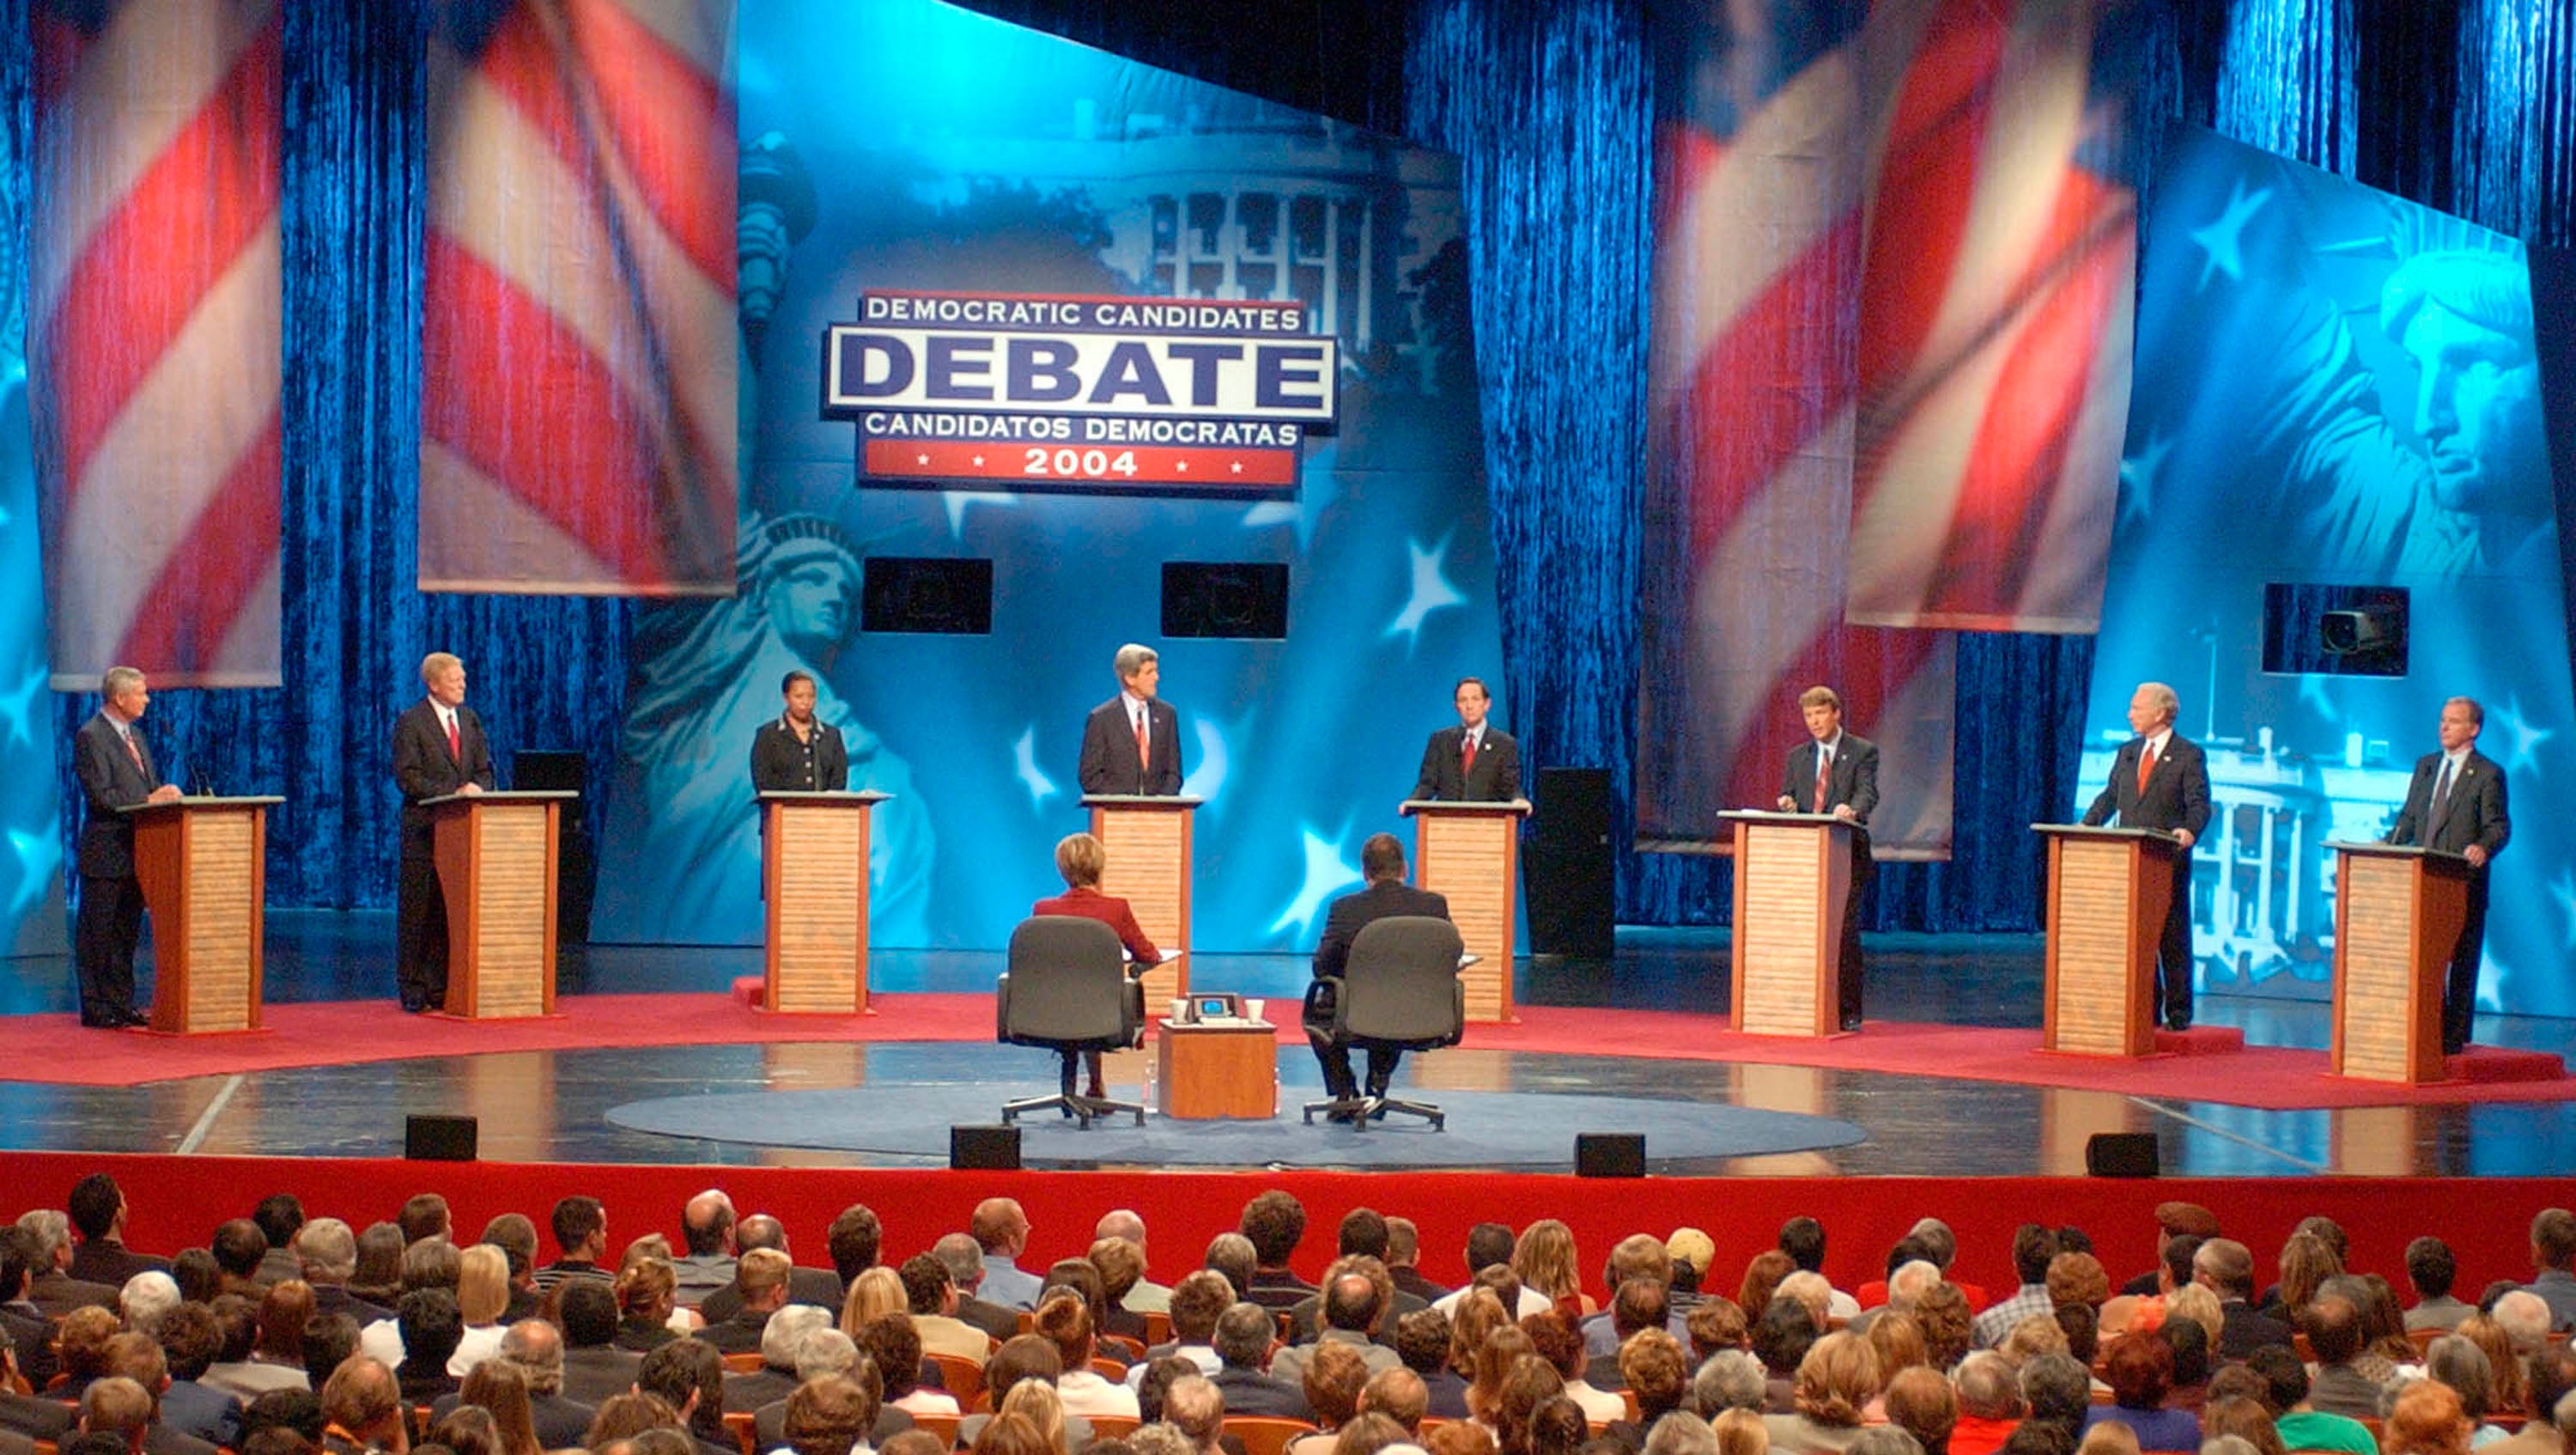 Bob Graham, on the left, participates in a Democratic primary debate in New Mexico on 4 September 2003